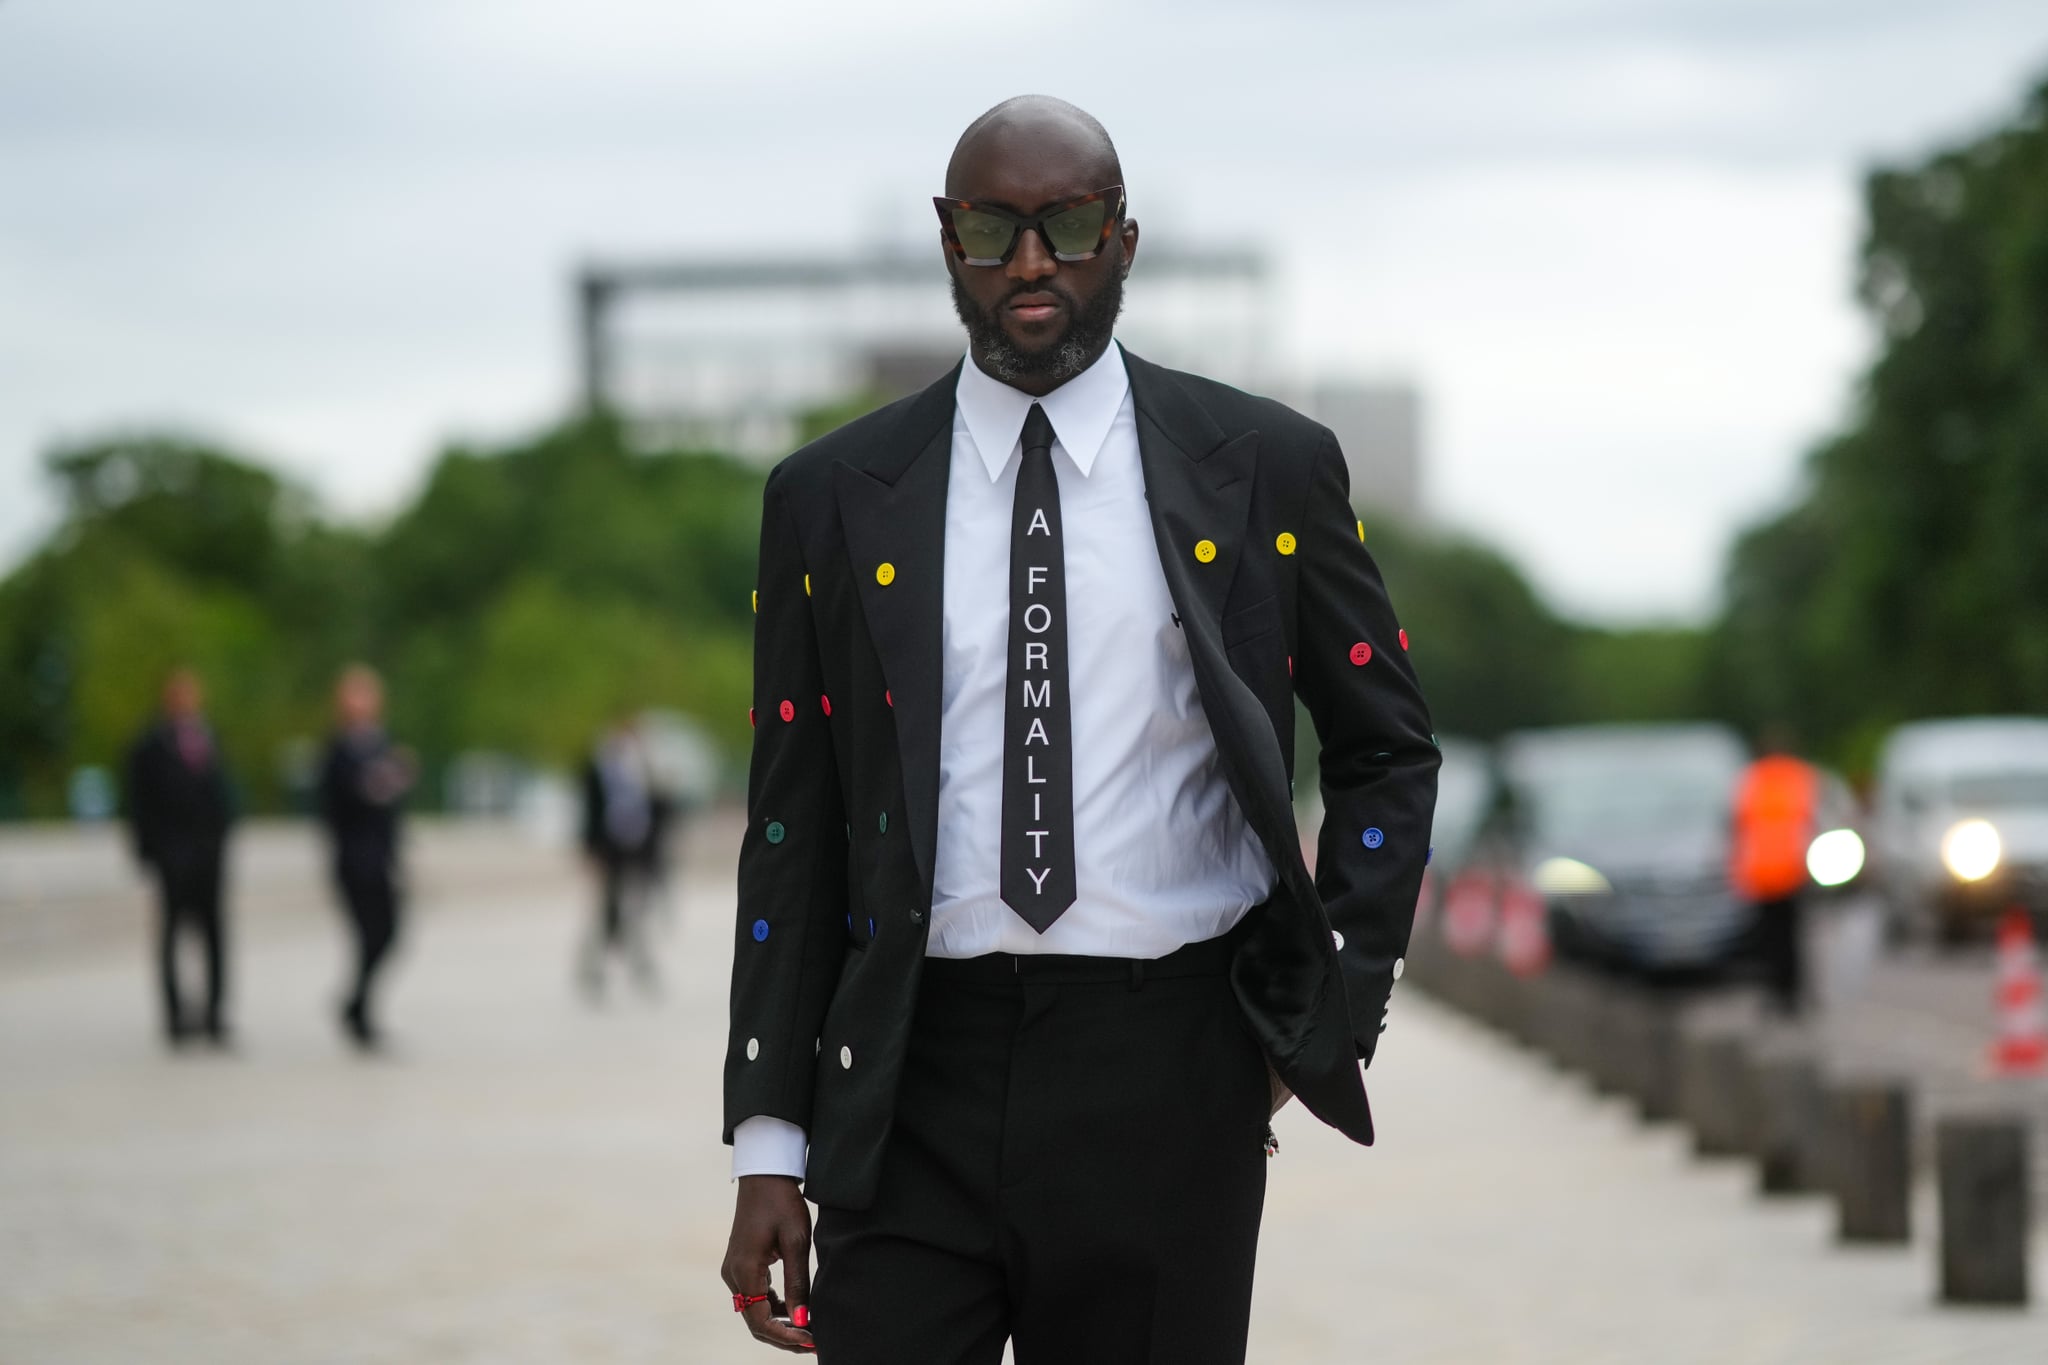 PARIS, FRANCE - JULY 05: Virgil Abloh wears a white shirt, a black tie with 'A Formality' slogan, a black blazer jacket with multicolored buttons embroidered, black flared suit pants, a red ring, a gold watch, butterfly sunglasses, outside Louis Vuitton Parfum hosts dinner at Fondation Louis Vuitton, during Paris Fashion Week - Haute Couture Fall/Winter 2021/2022, on July 05, 2021 in Paris, France. (Photo by Edward Berthelot/Getty Images)